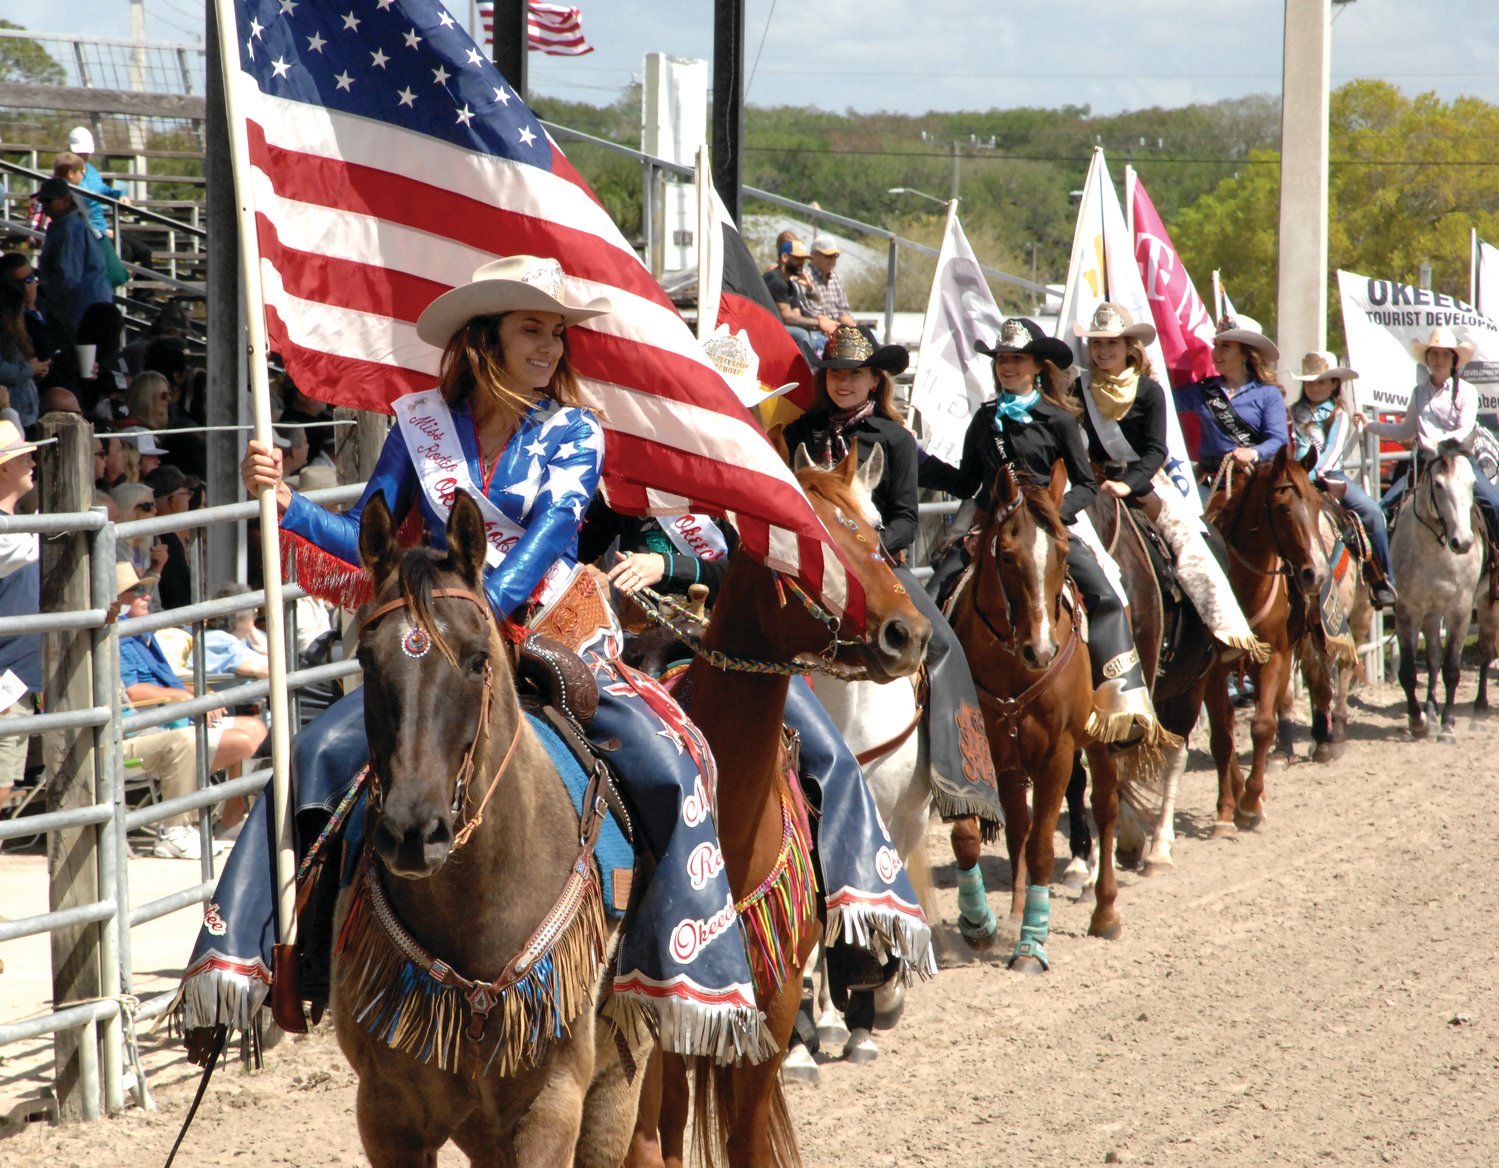 OKEECHOBEE -- The rodeo starts with the grand entry of the American flag, followed by sponsor flags.